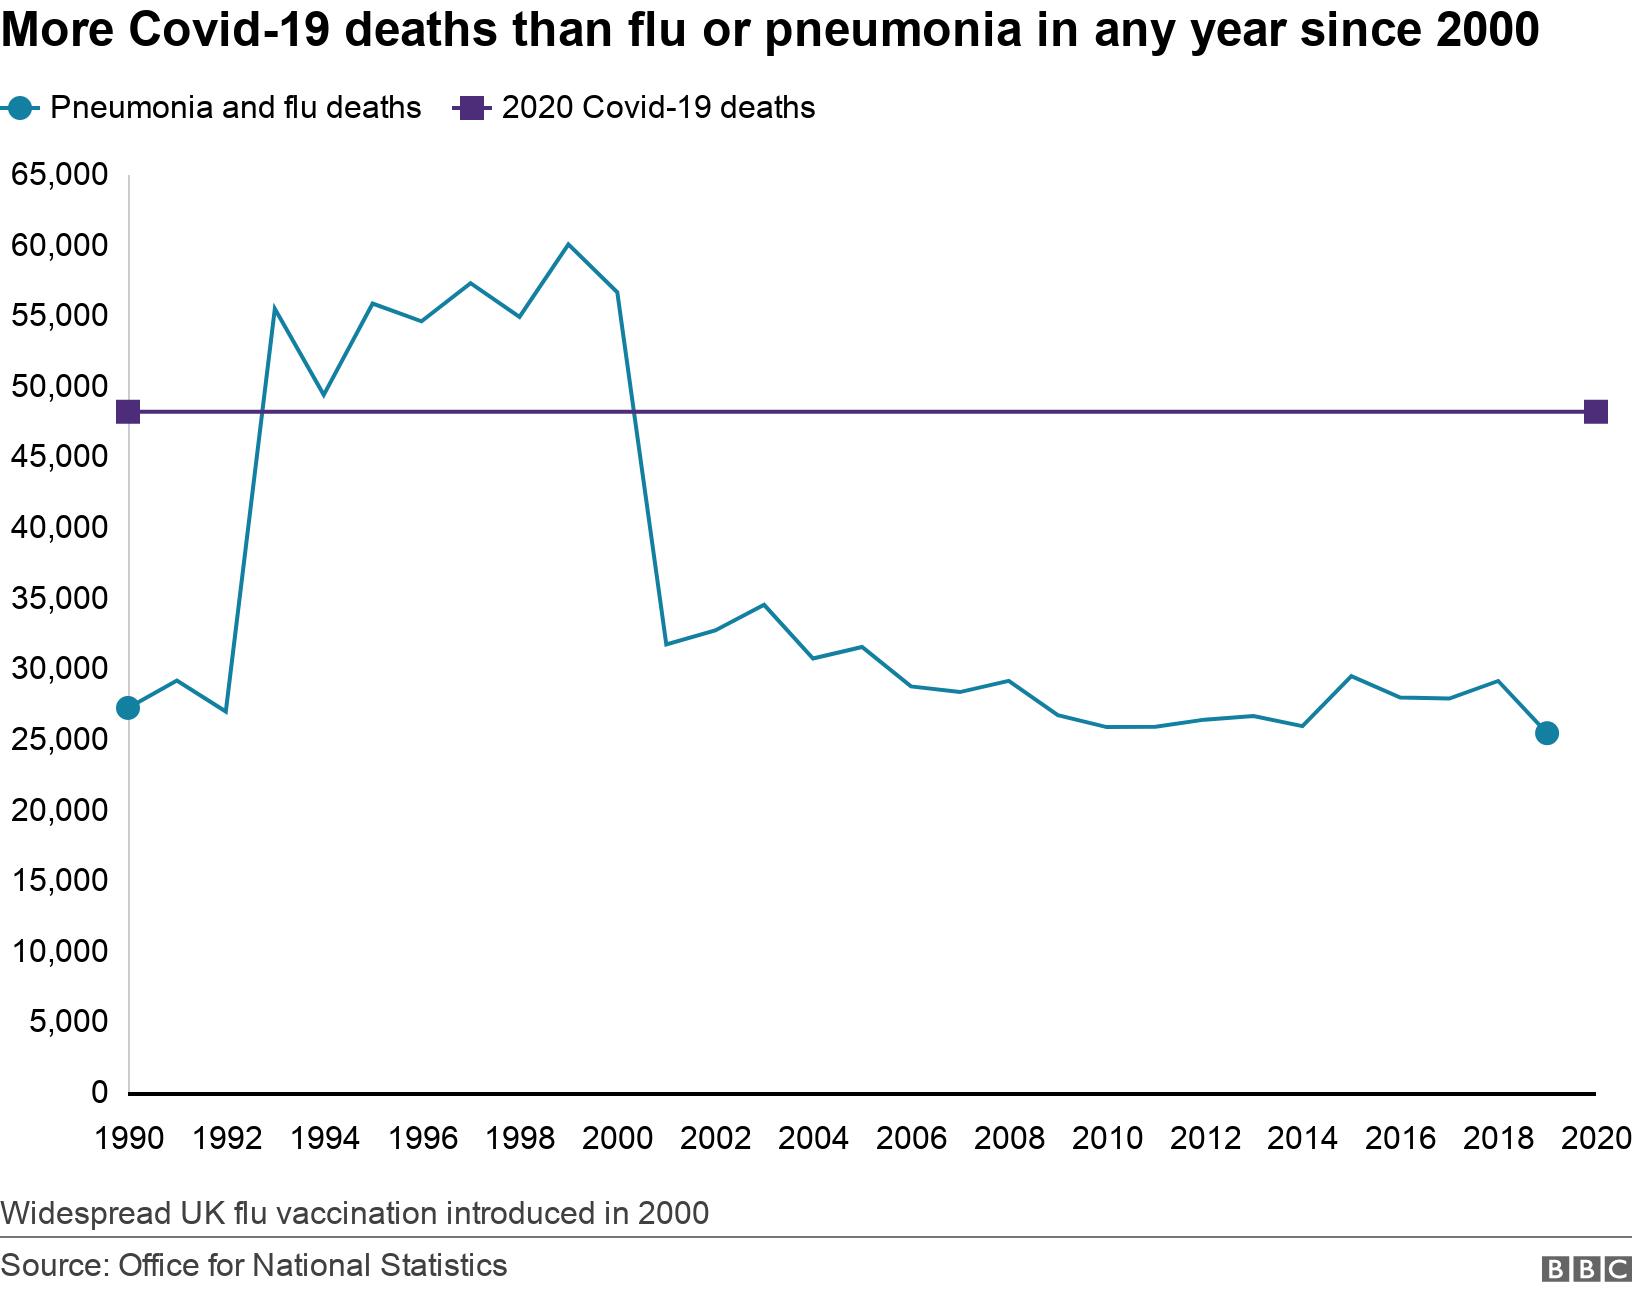 More Covid-19 deaths than flu or pneumonia in any year since 2000. . Almost 50,000 deaths in 2020 are due to Covid-19. the last time flu-and-pneumonia saw this many deaths was before the introduction of widespread flu vaccination in the UK in 2000.  Widespread UK flu vaccination introduced in 2000.